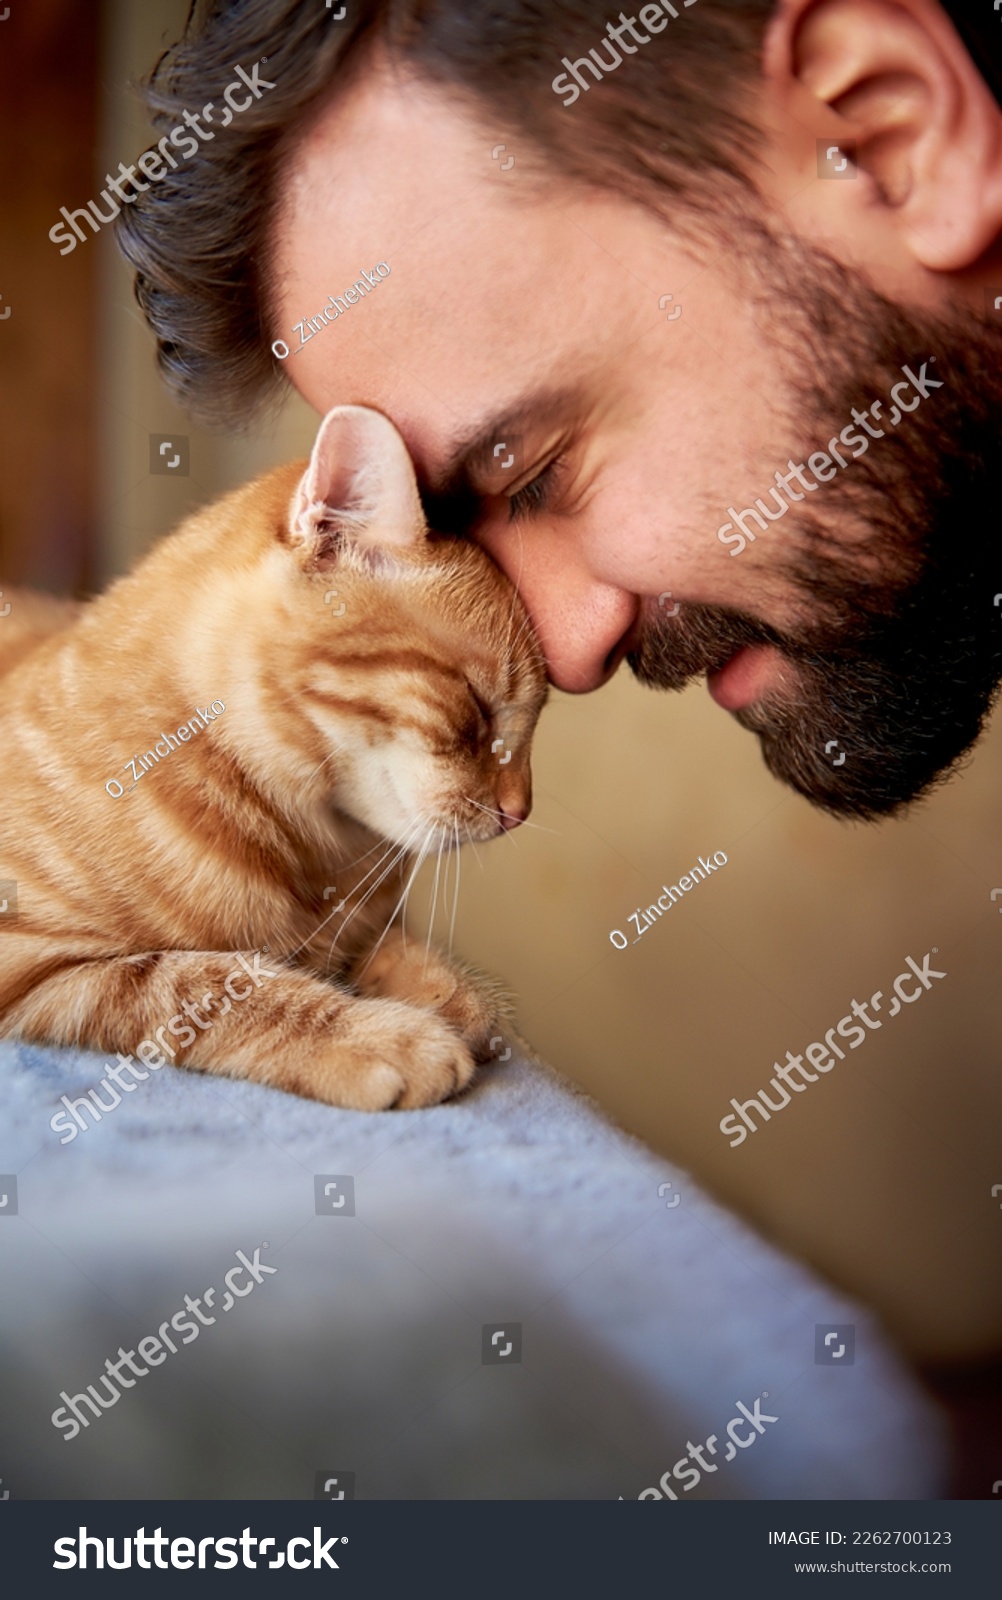 Muzzle of a red cat and a man's face. Close-up of handsome young beard man and tabby cat - two profiles. Pets and humans friendship, love and trust concept #2262700123